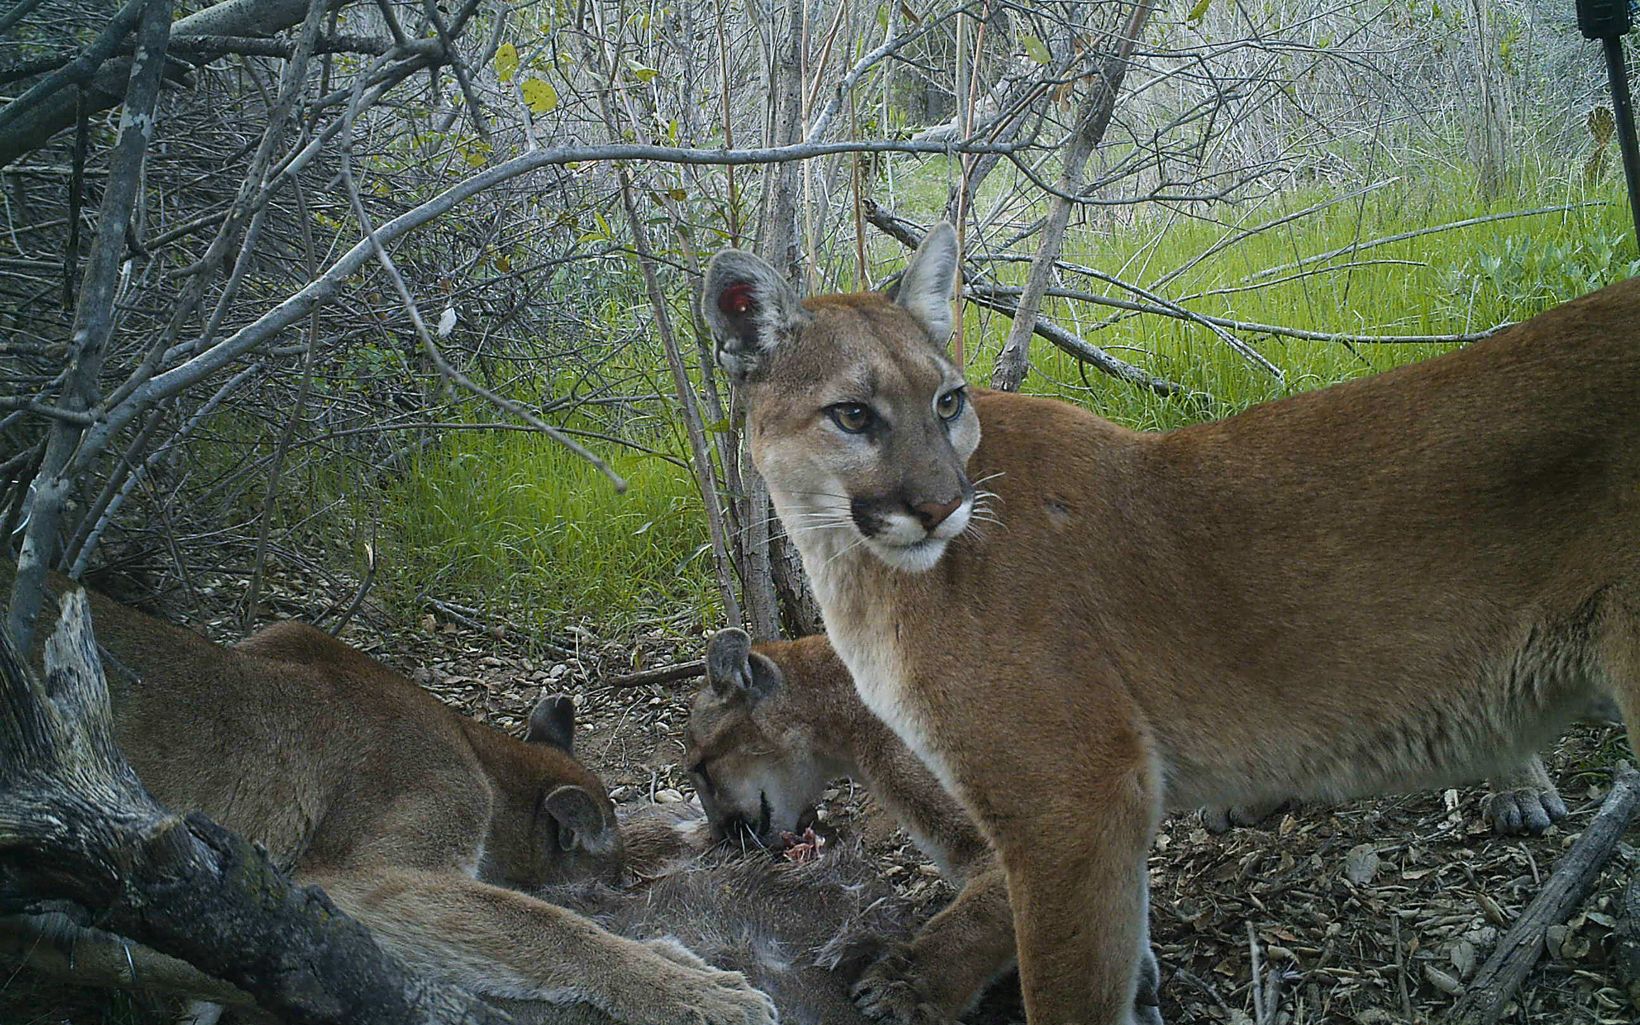 Three mountain lions eat roadkill deer set up as bait to capture mountain lions on camera.